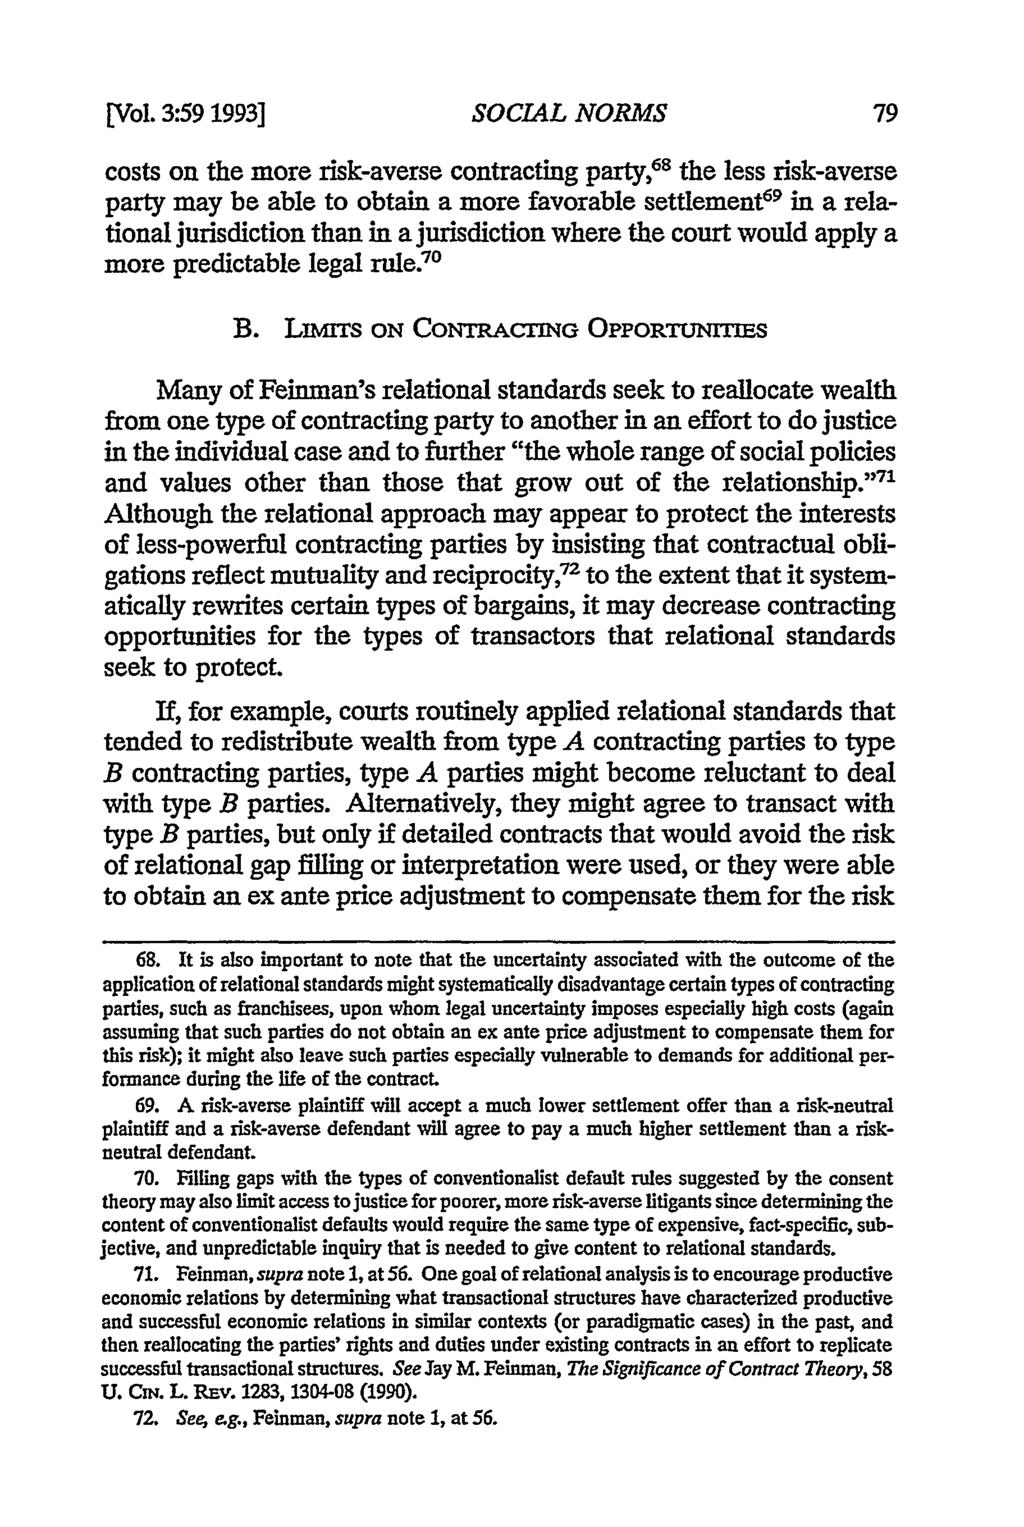 [Vol. 3:59 1993] SOCIAL NORMS costs on the more risk-averse contracting party, 68 the less risk-averse party may be able to obtain a more favorable settlement 6 9 in a relational jurisdiction than in